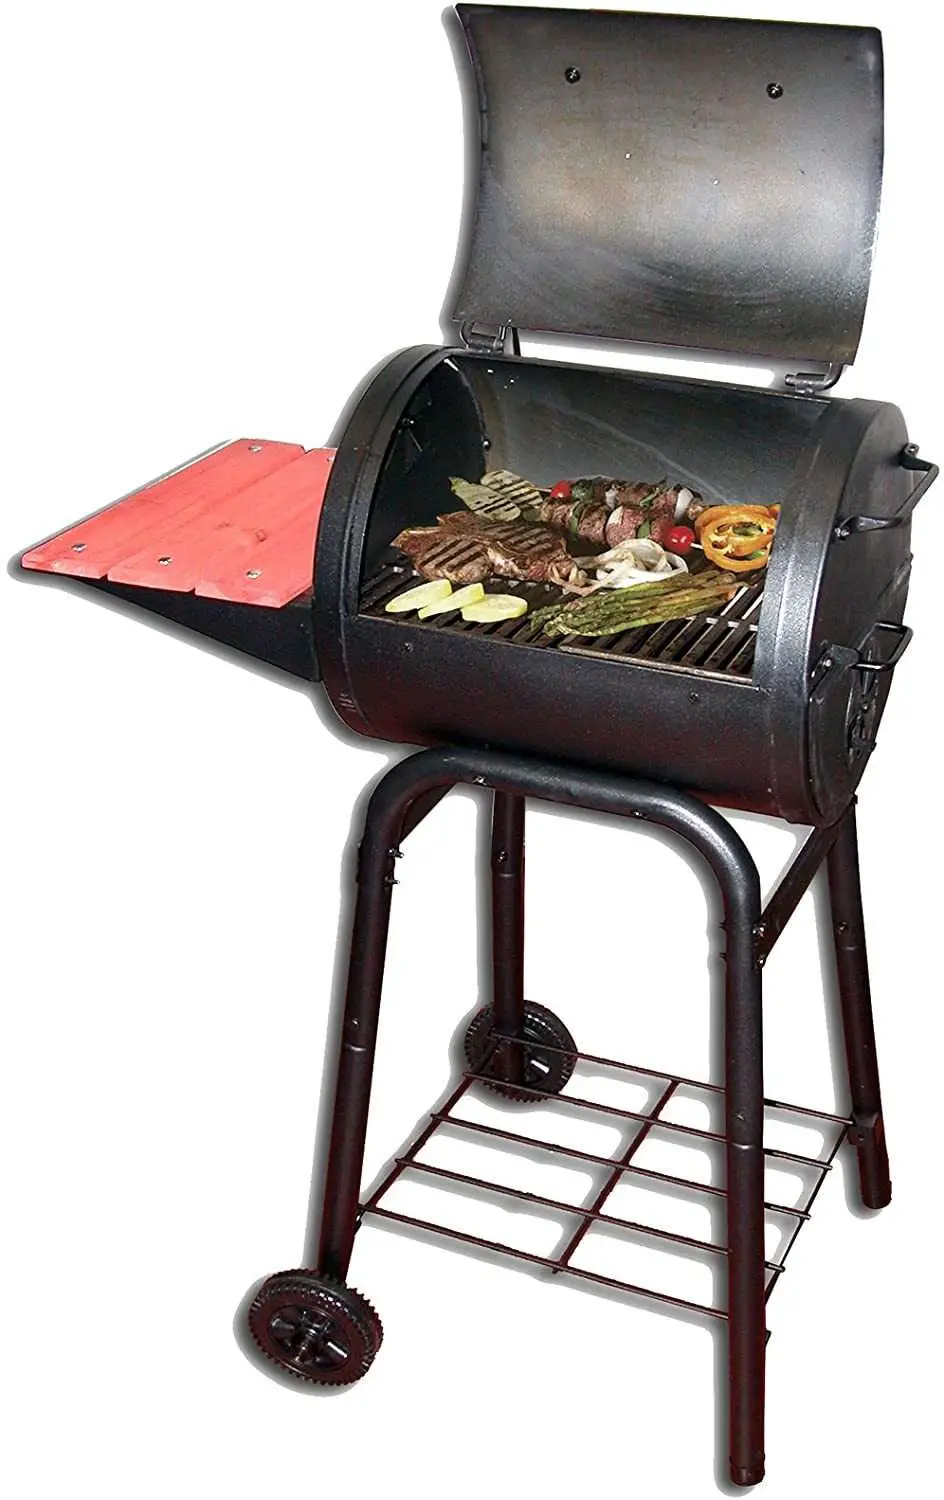 Best Charcoal Grills of 2020